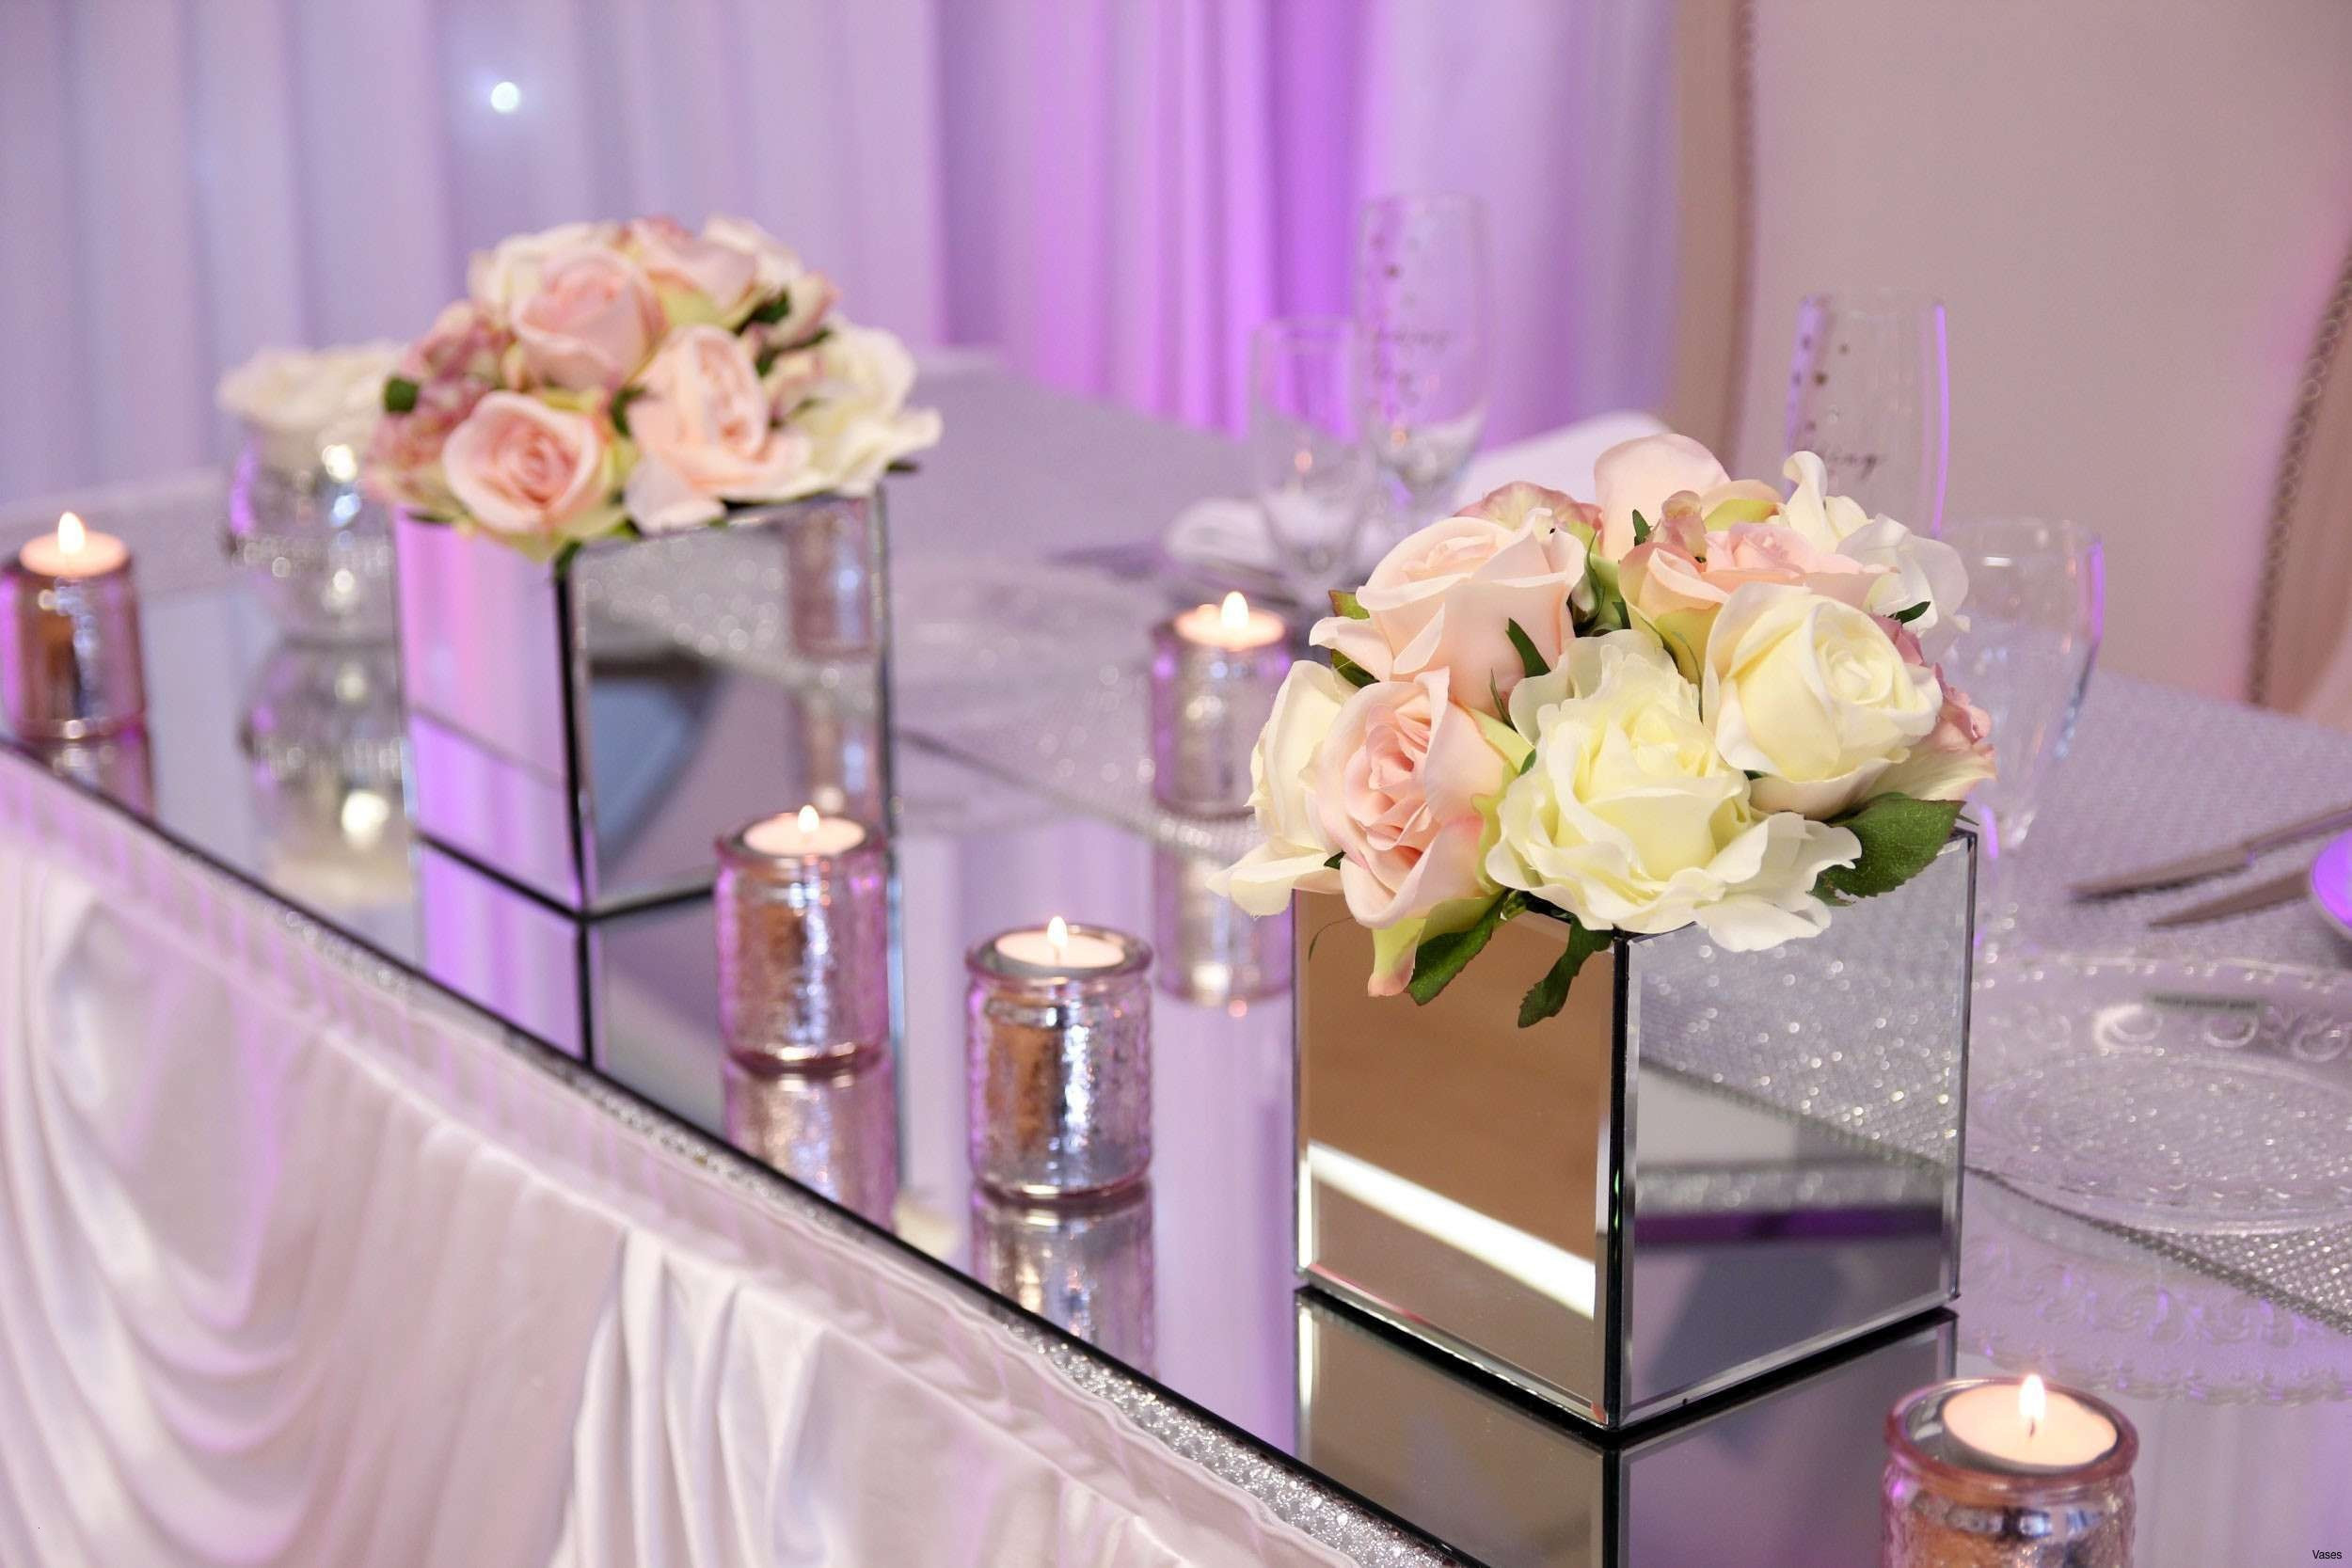 24 Amazing Tall Glass Vase Centerpiece Ideas 2023 free download tall glass vase centerpiece ideas of 16 modern long table wedding decoration ideas italib net for mirrored square vase 3h vases mirror table decorationi 0d weddings design ideas outdoor wedd